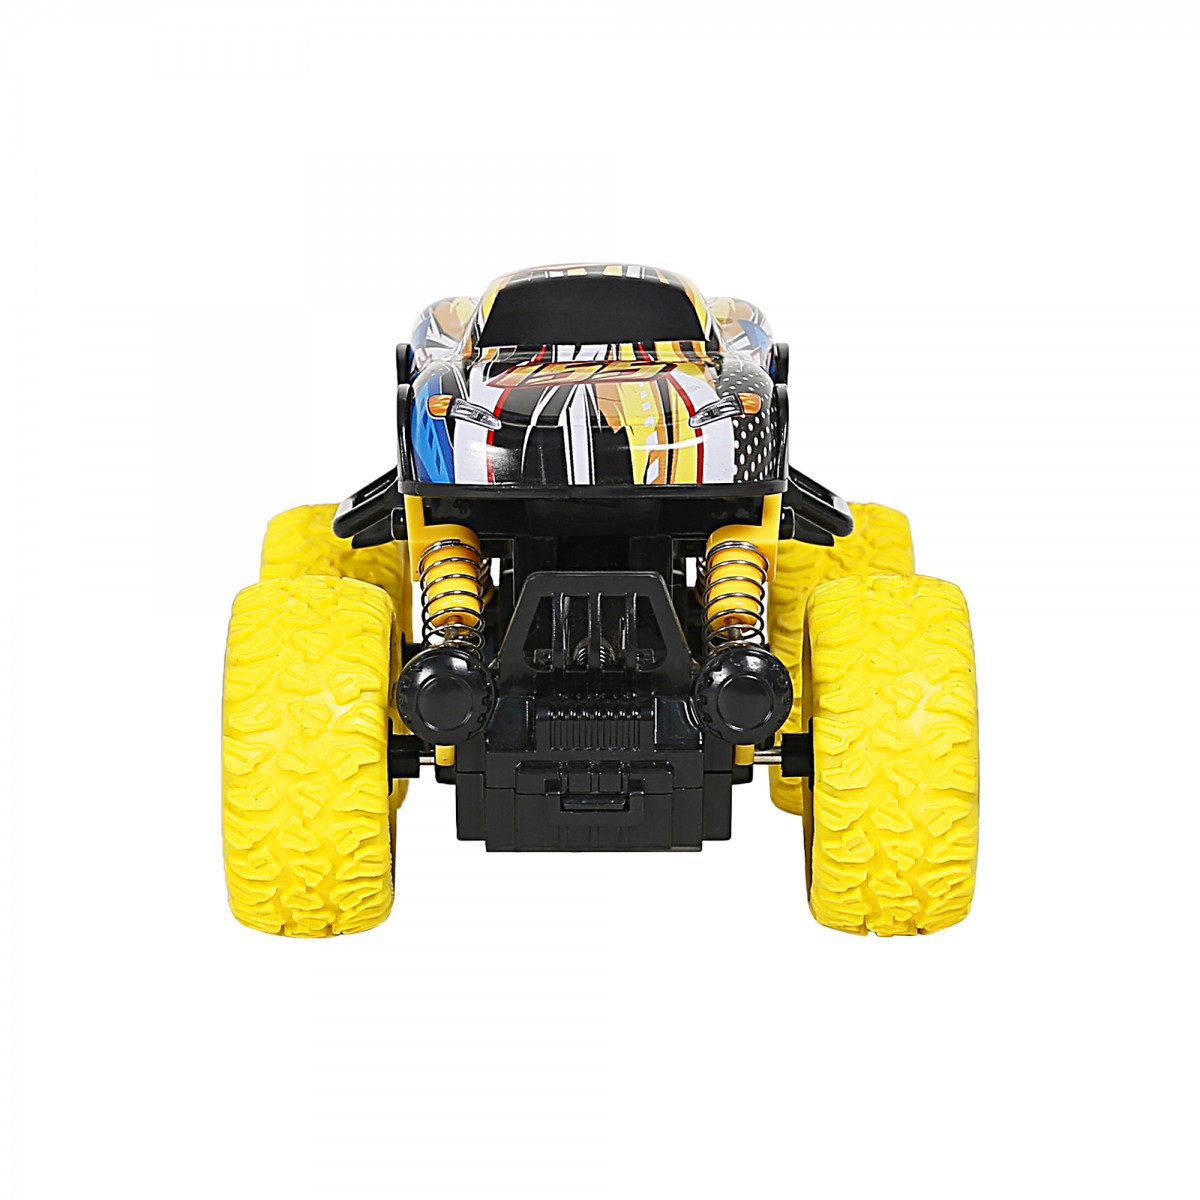 Ralleyz Pull Back Monster Car for Kids, 3Y+, Yellow